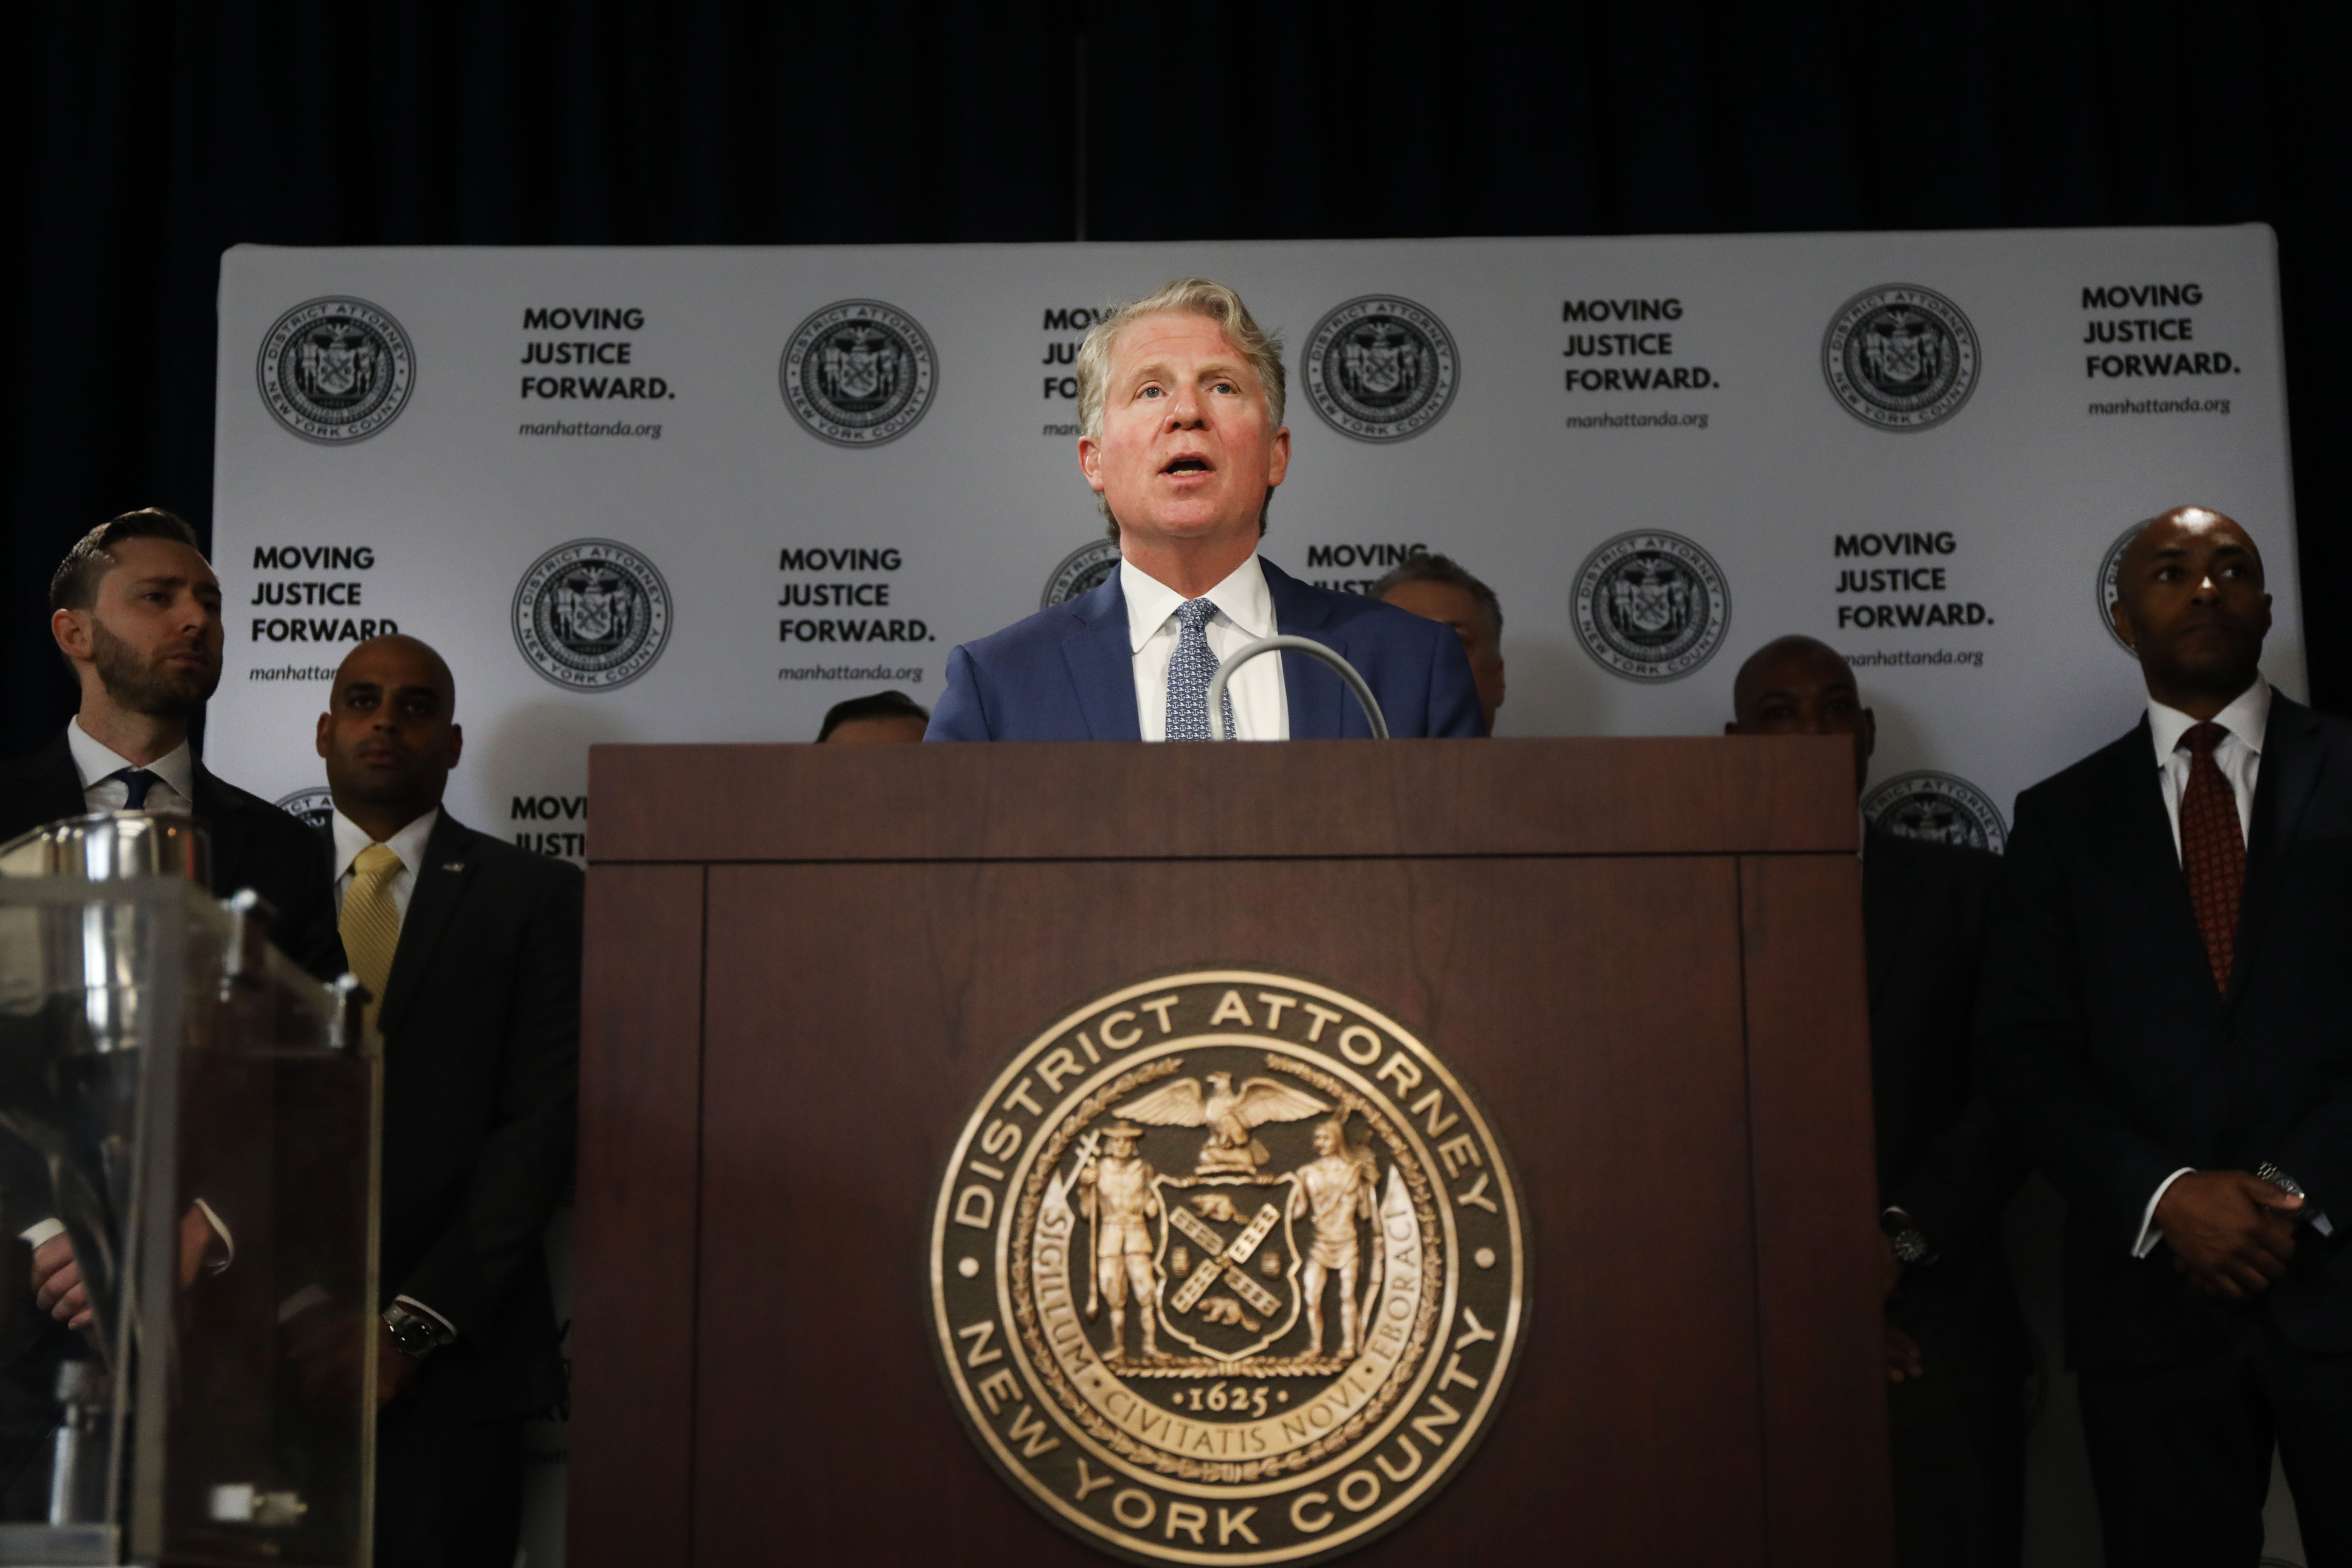 Surrounded by pictures and items seized, Manhattan District Attorney Cyrus Vance Jr. announces the take down of a crime ring run on the dark web on April 16, 2019 in New York City. (Photo by Spencer Platt/Getty Images)